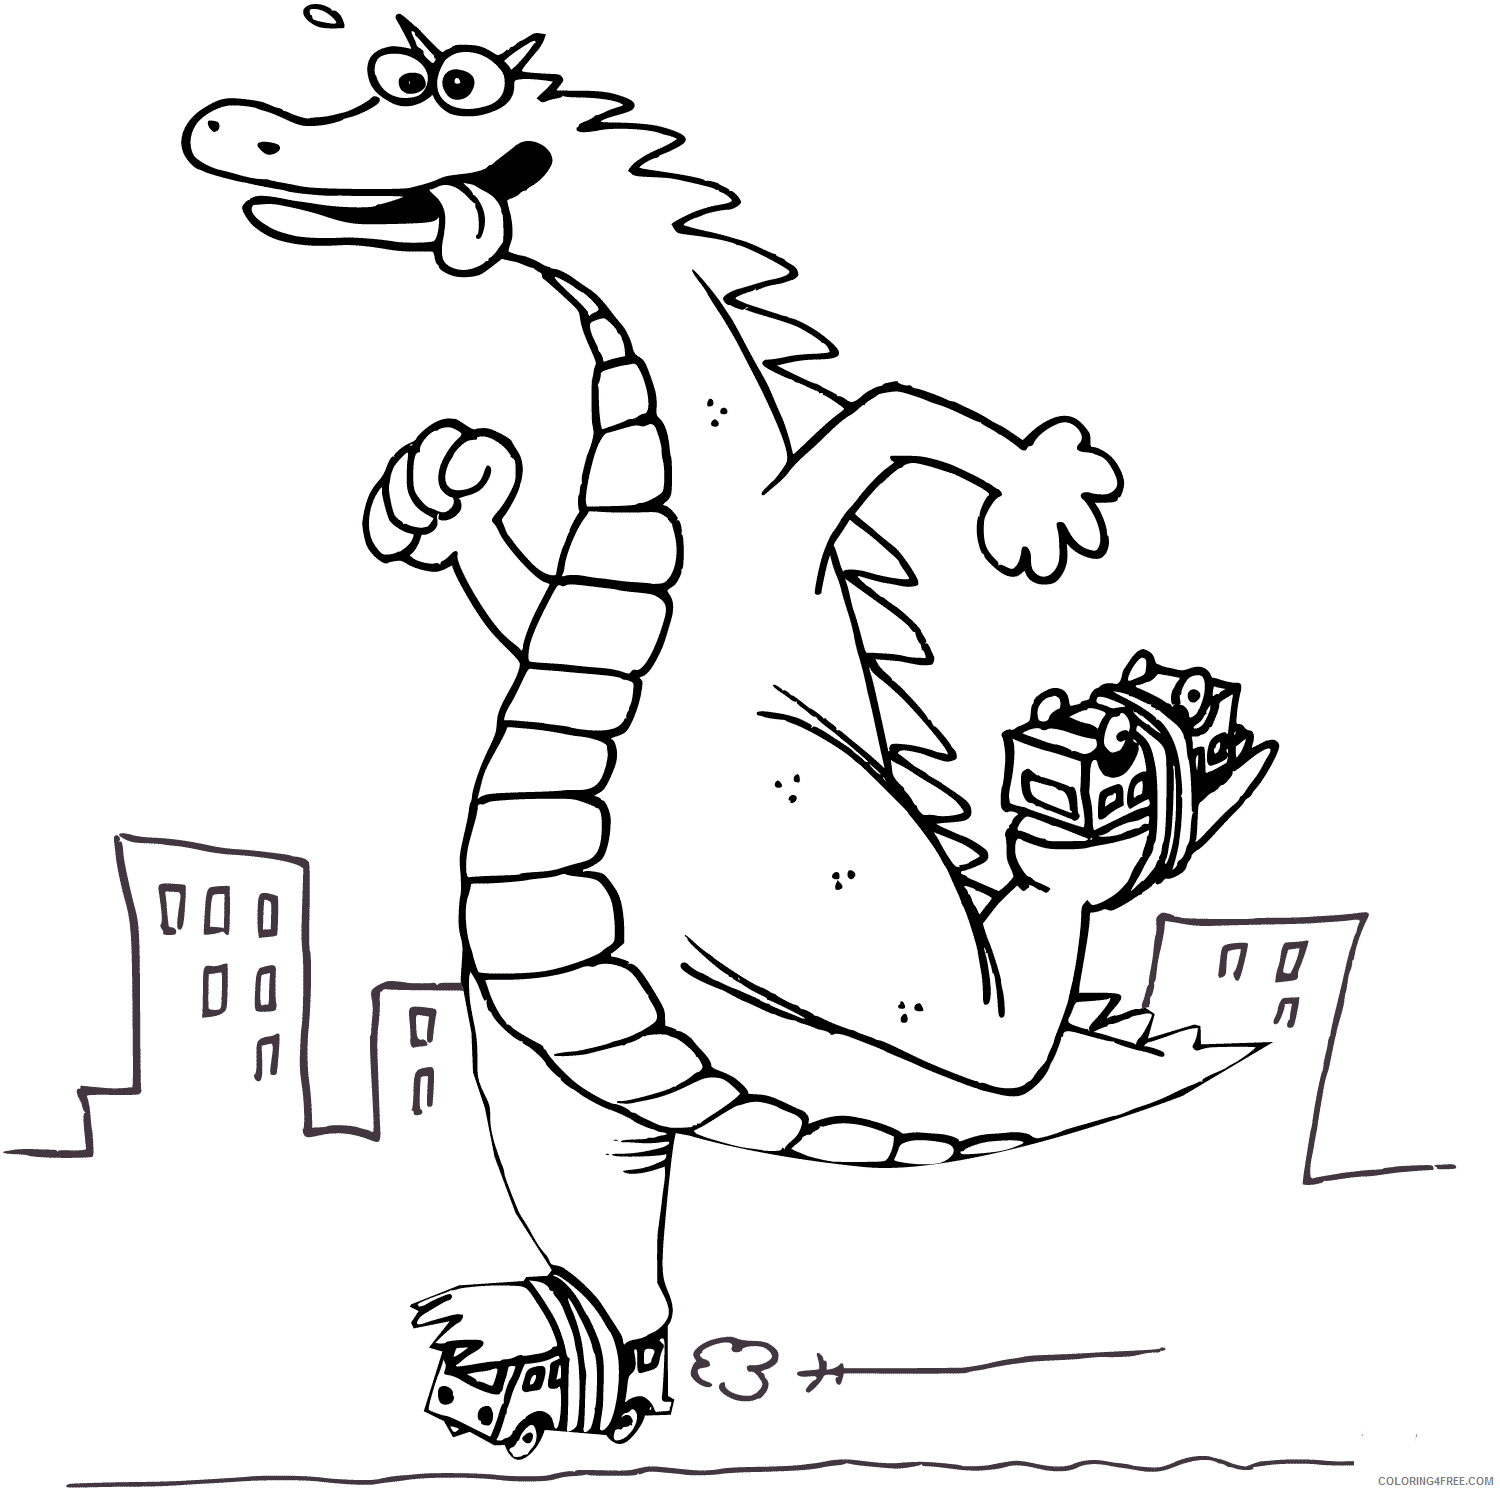 Godzilla Coloring Pages TV Film godzilla is riding on bus rollers 2020 03275 Coloring4free